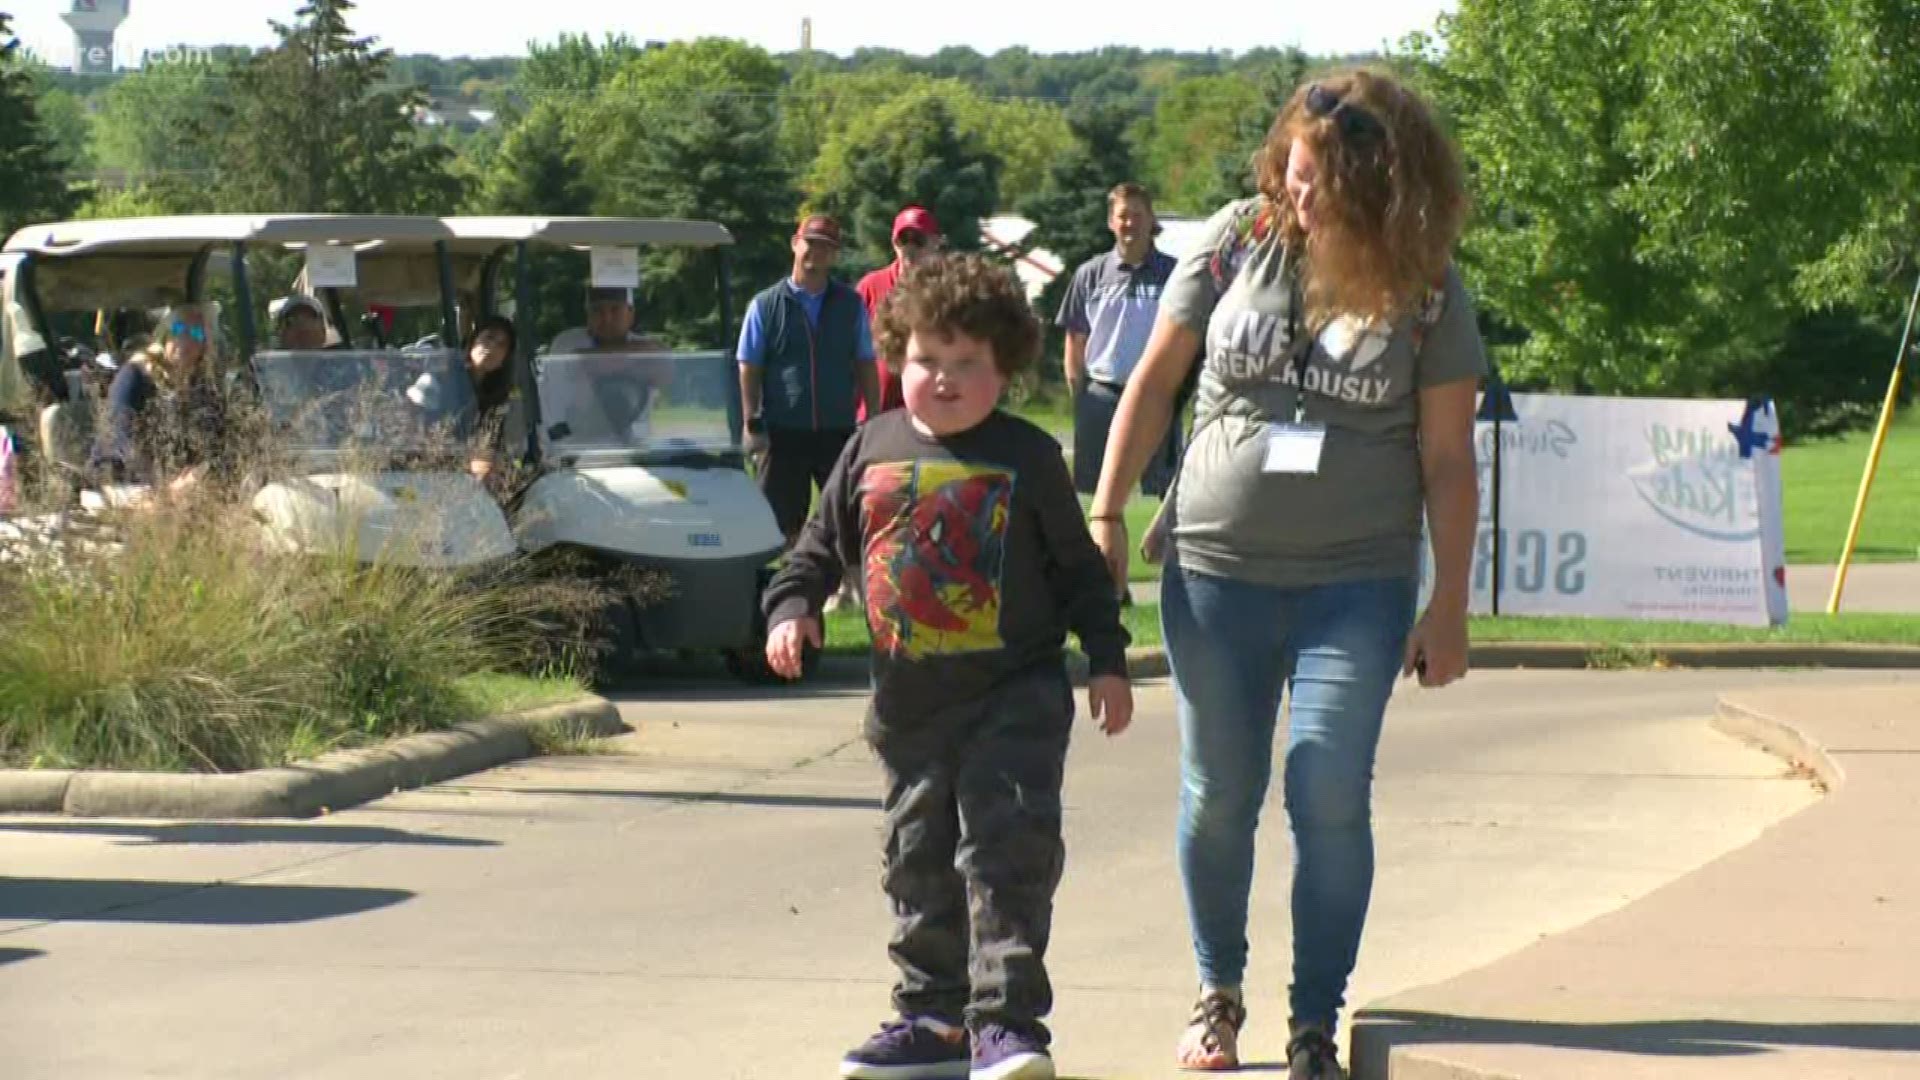 When Quinn Larson received a check from Make-A-Wish, he gave the money right back to the city of Waconia to help fund an inclusive playground.